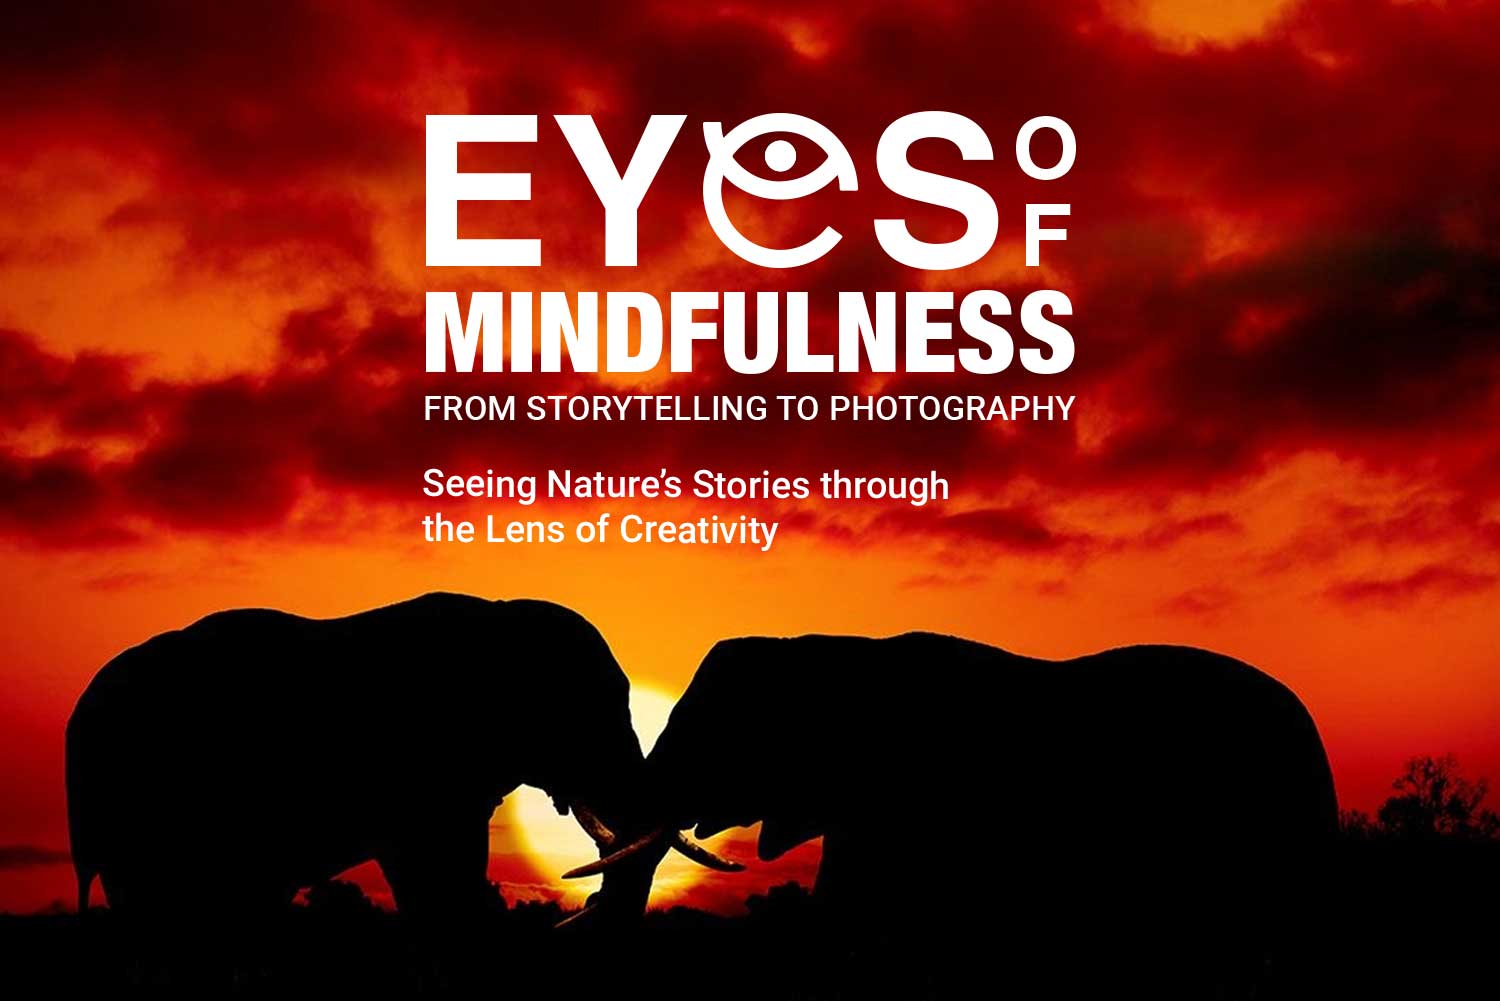 Eyes of Mindfulness: Seeing Nature’s Stories through the Lens of Creativity – From Storytelling to Photography